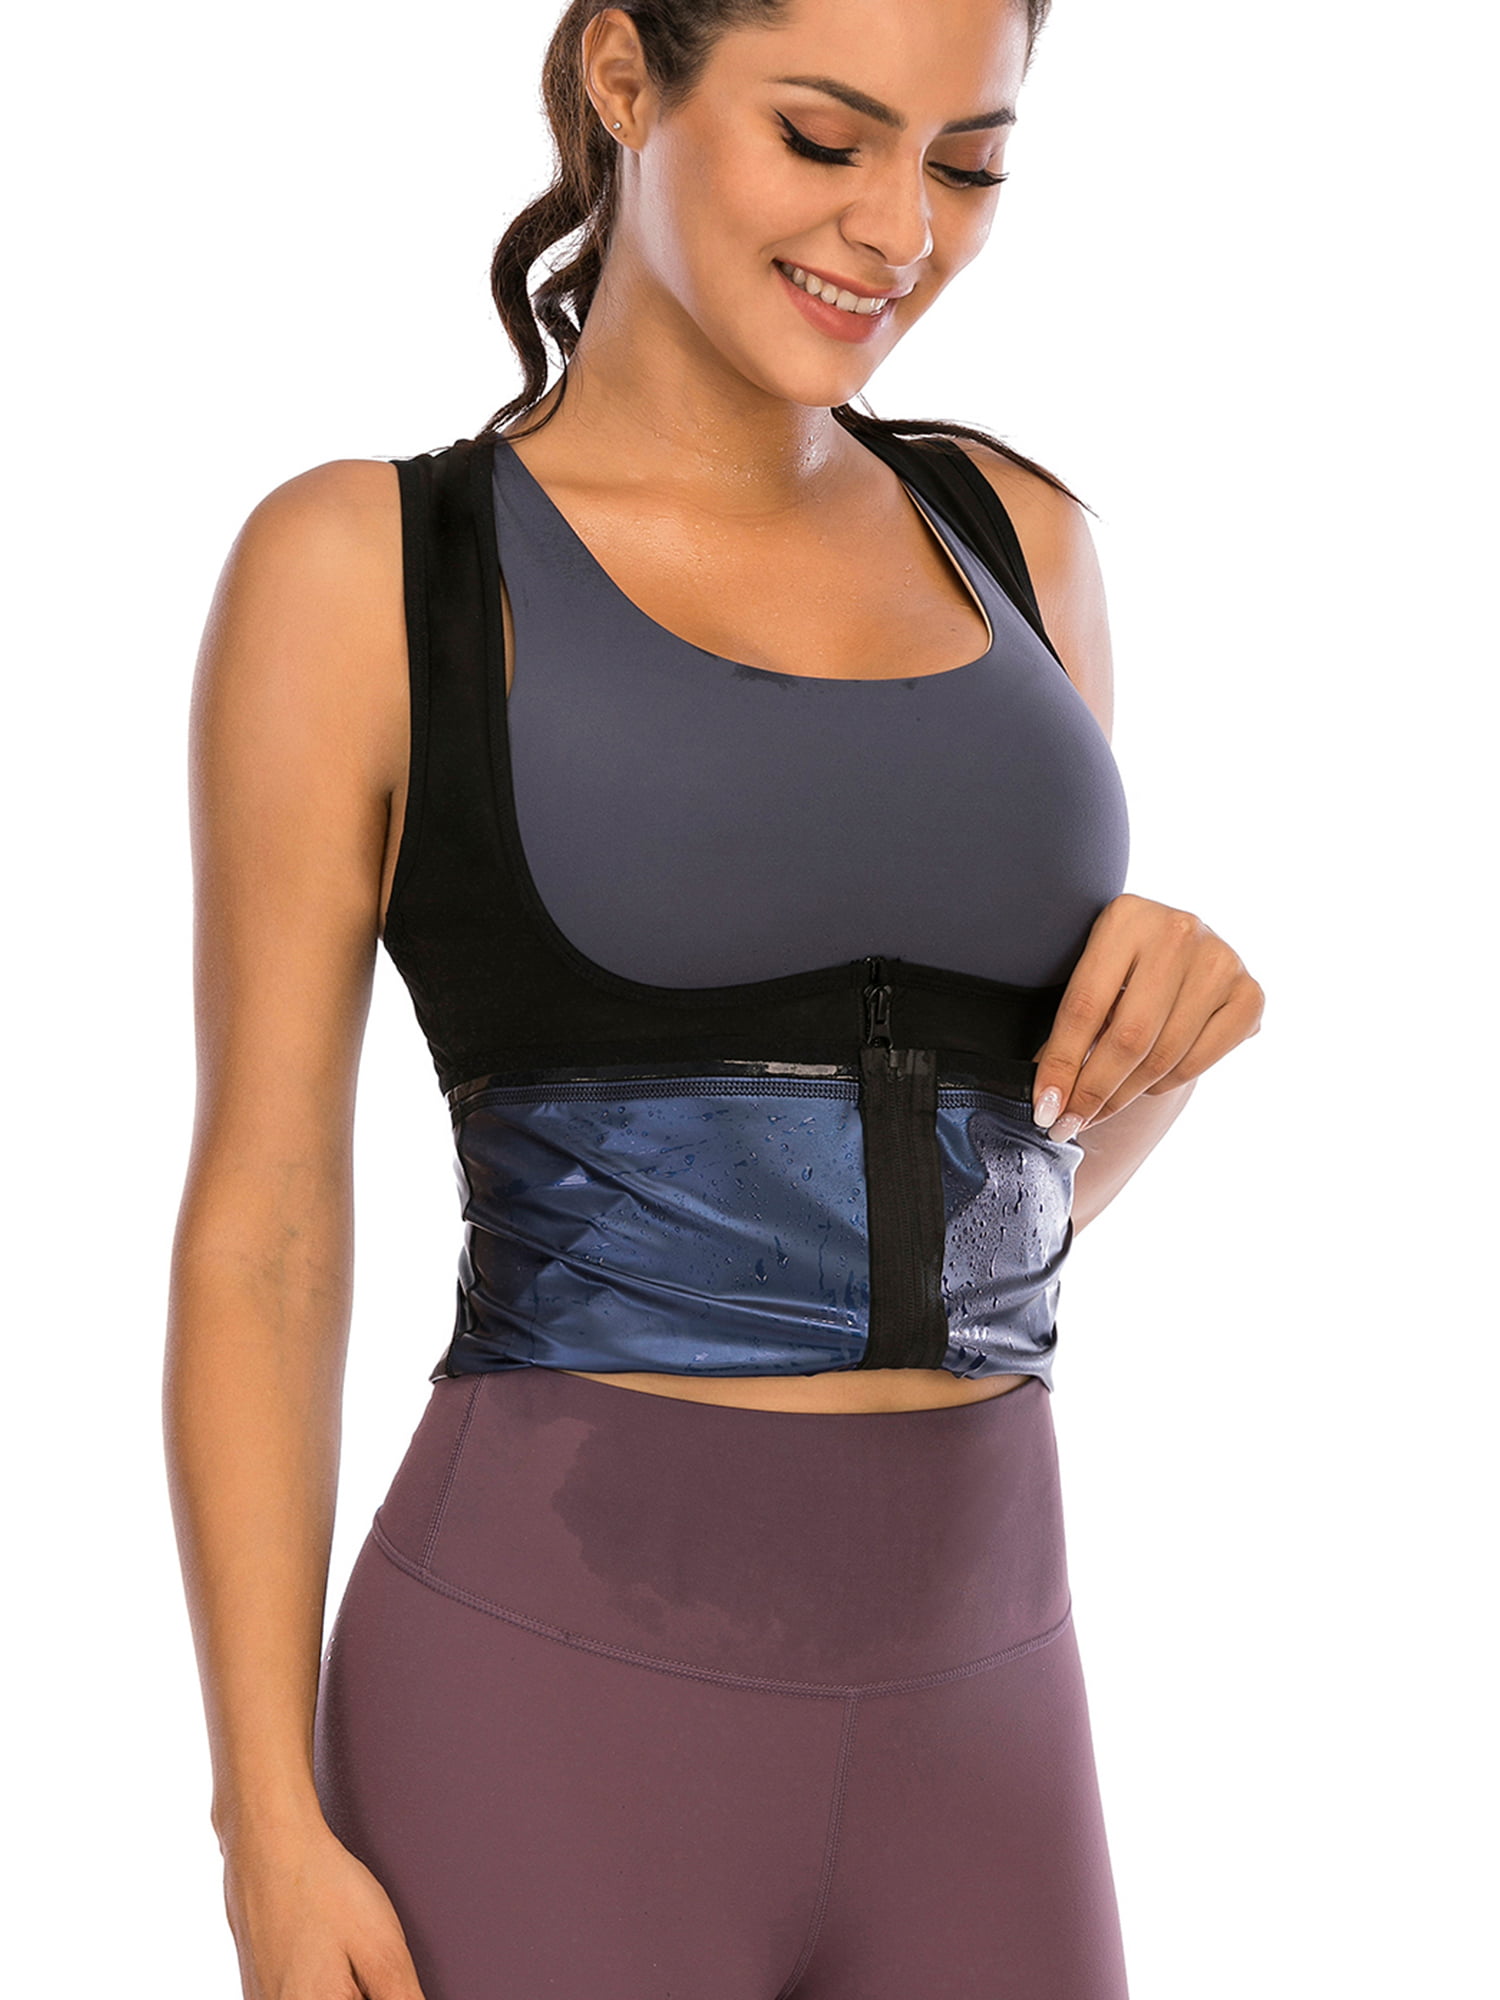 Plus Size Sauna Waist Trainer Slimming Workout TaLELINTA Top for